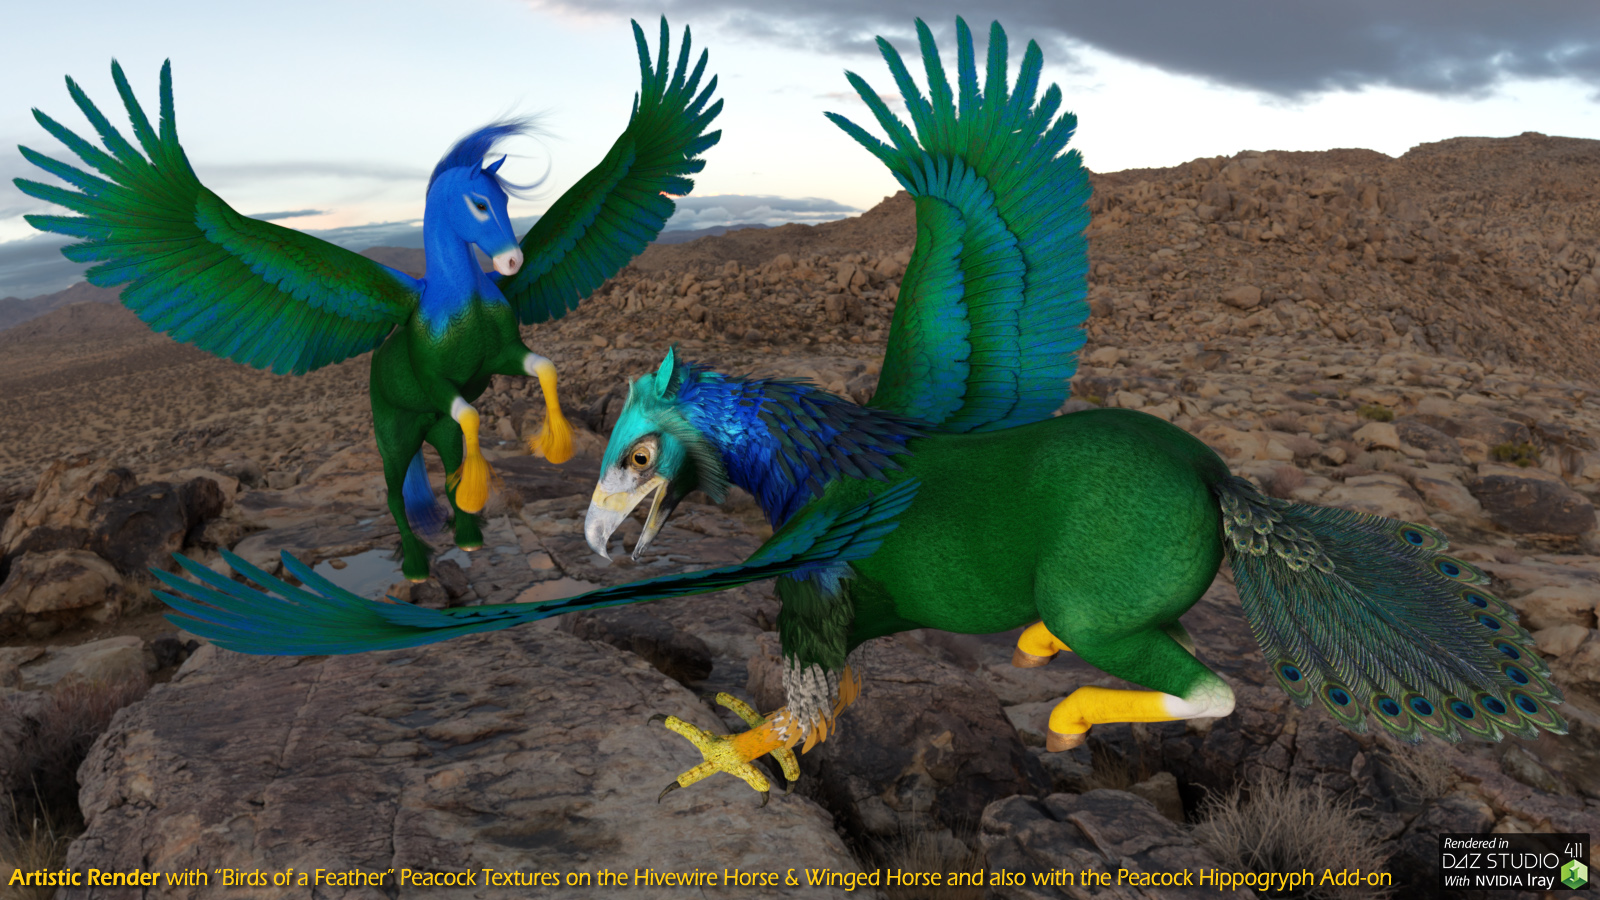 Peacock Winged Horse and Hippogryph